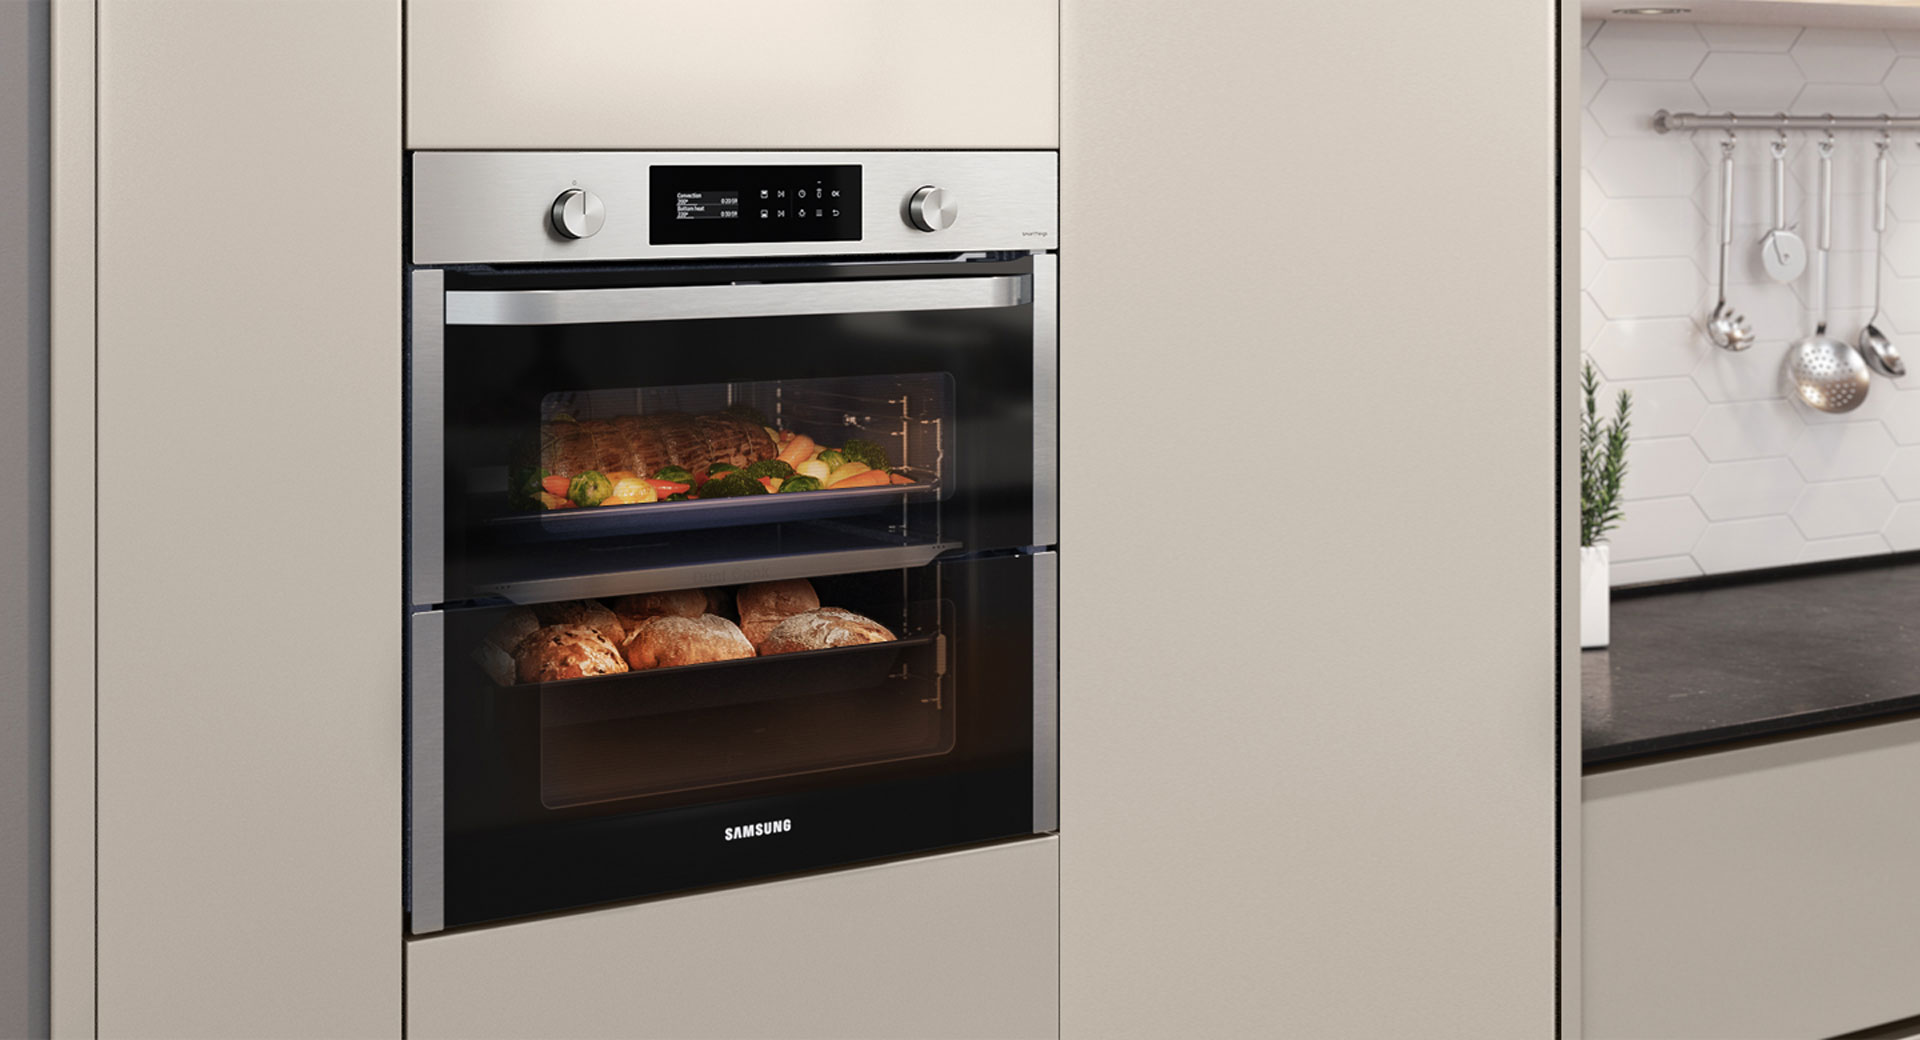 The endless possibilities offered by the Samsung Dual Cook Flex™ oven